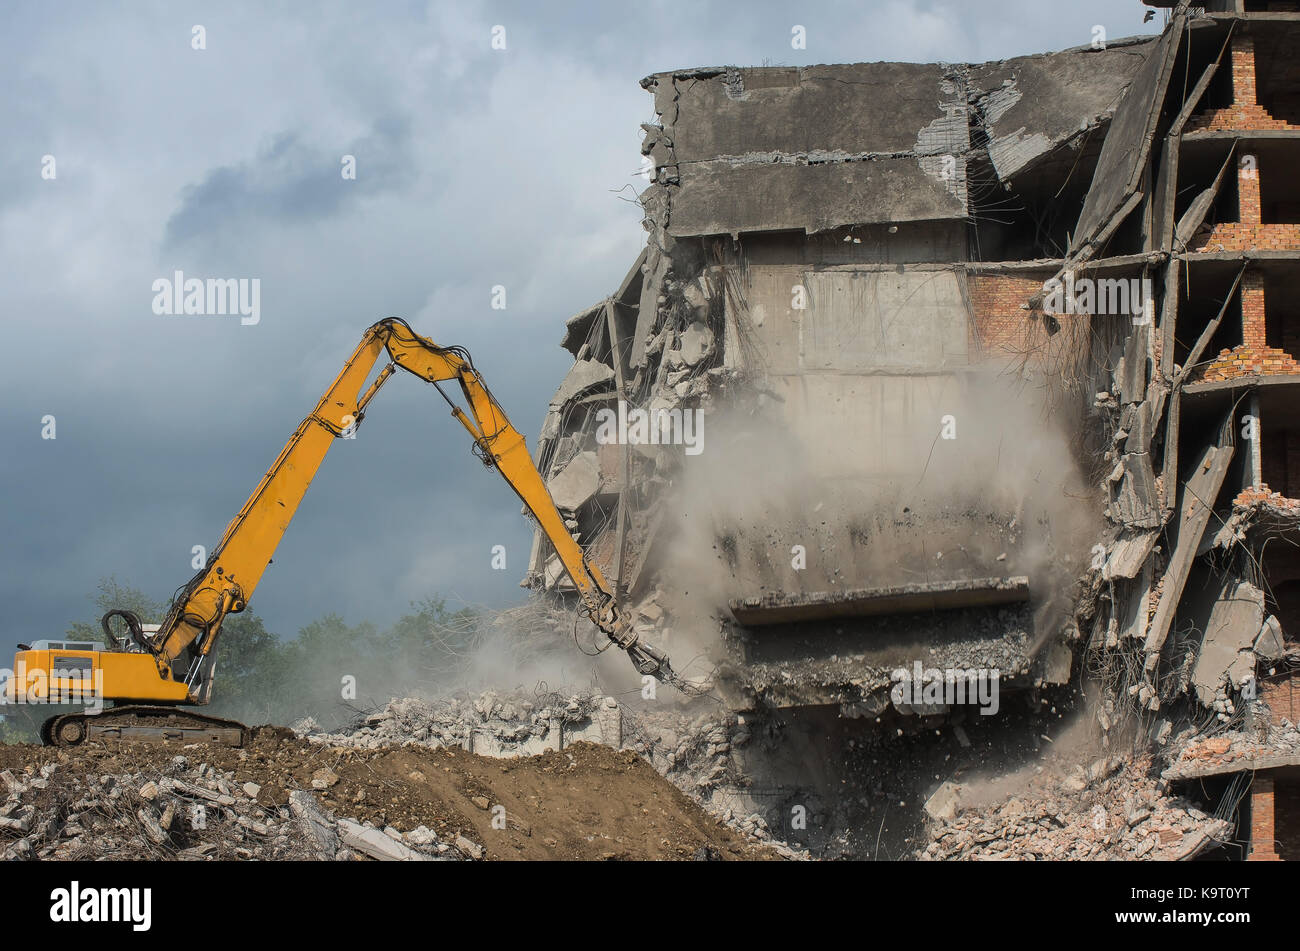 Heavy equipment being used to tear tearing down building construction. Moment of collapse. Stock Photo